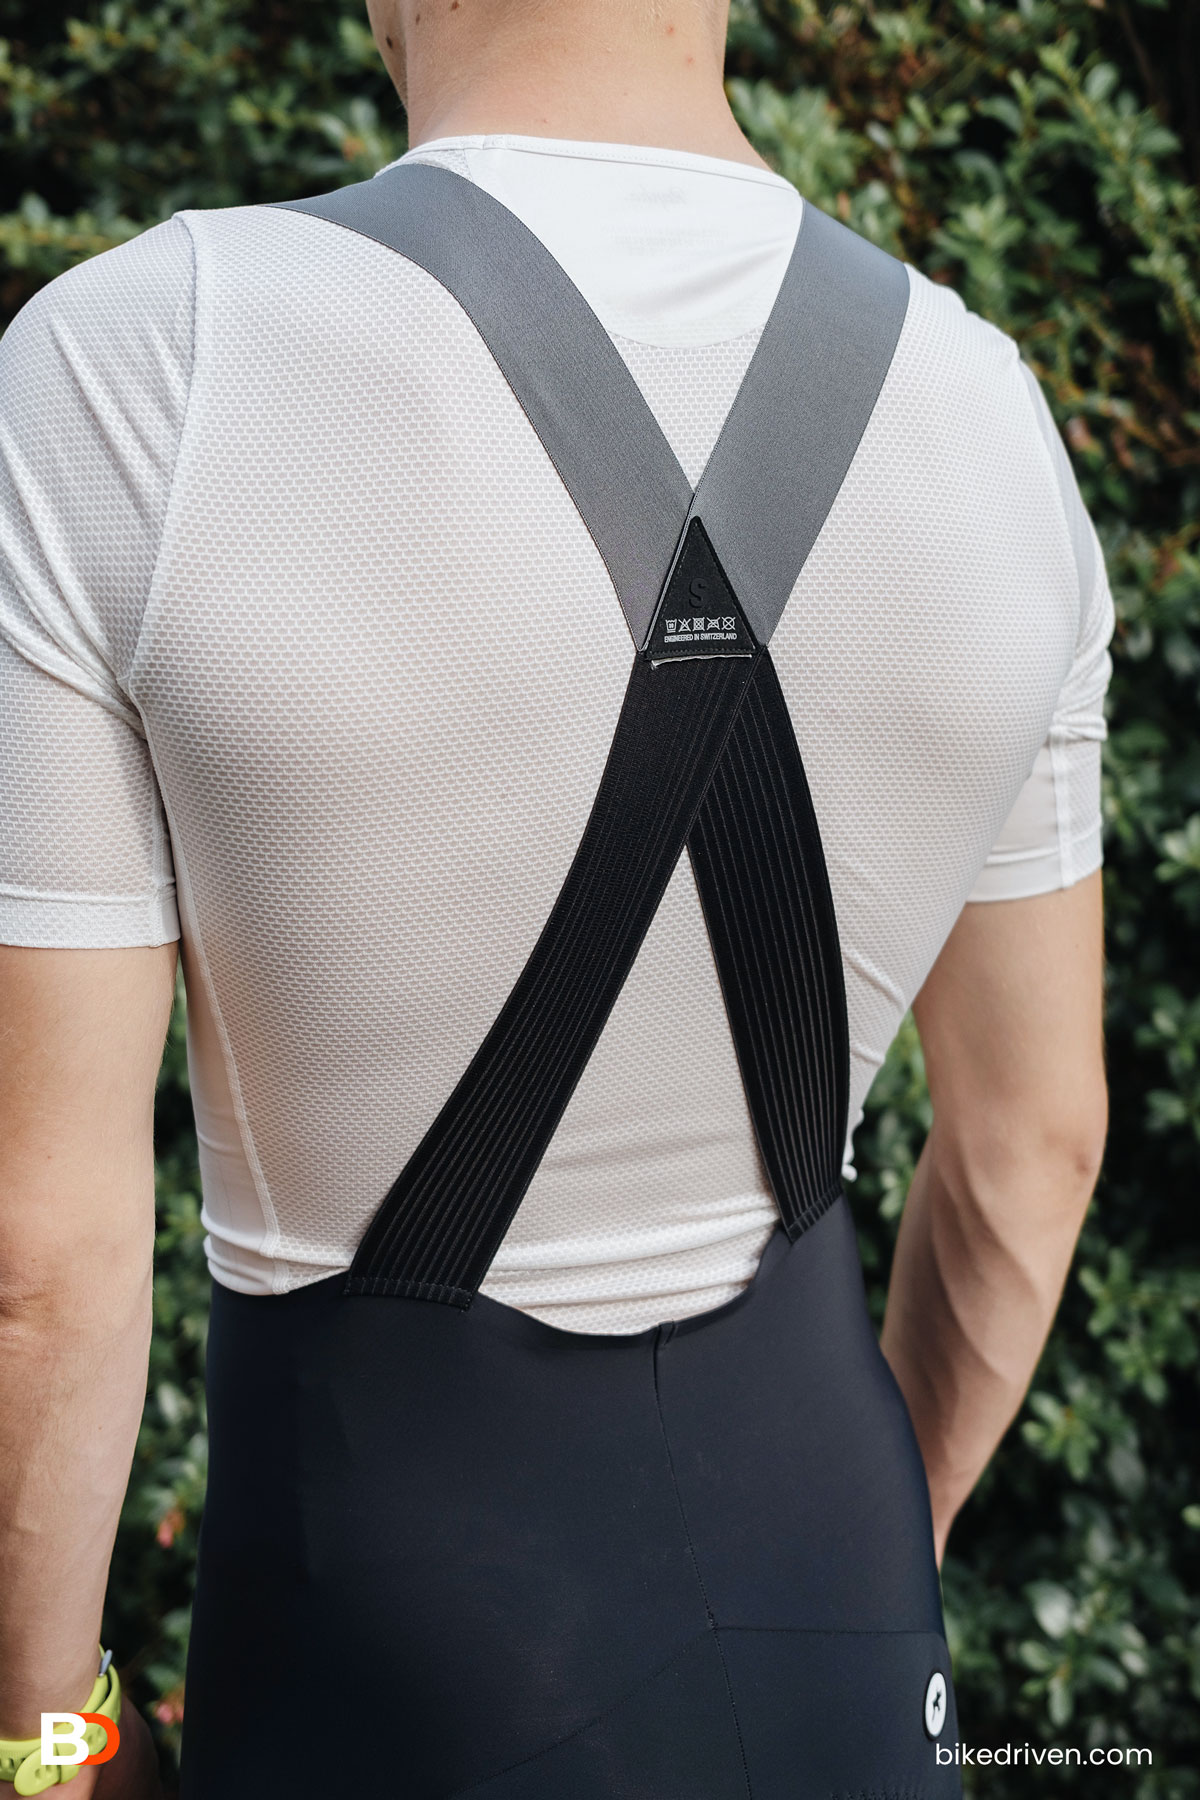 Assos Mille GT C2 Bib Shorts Review: Tried and Tested